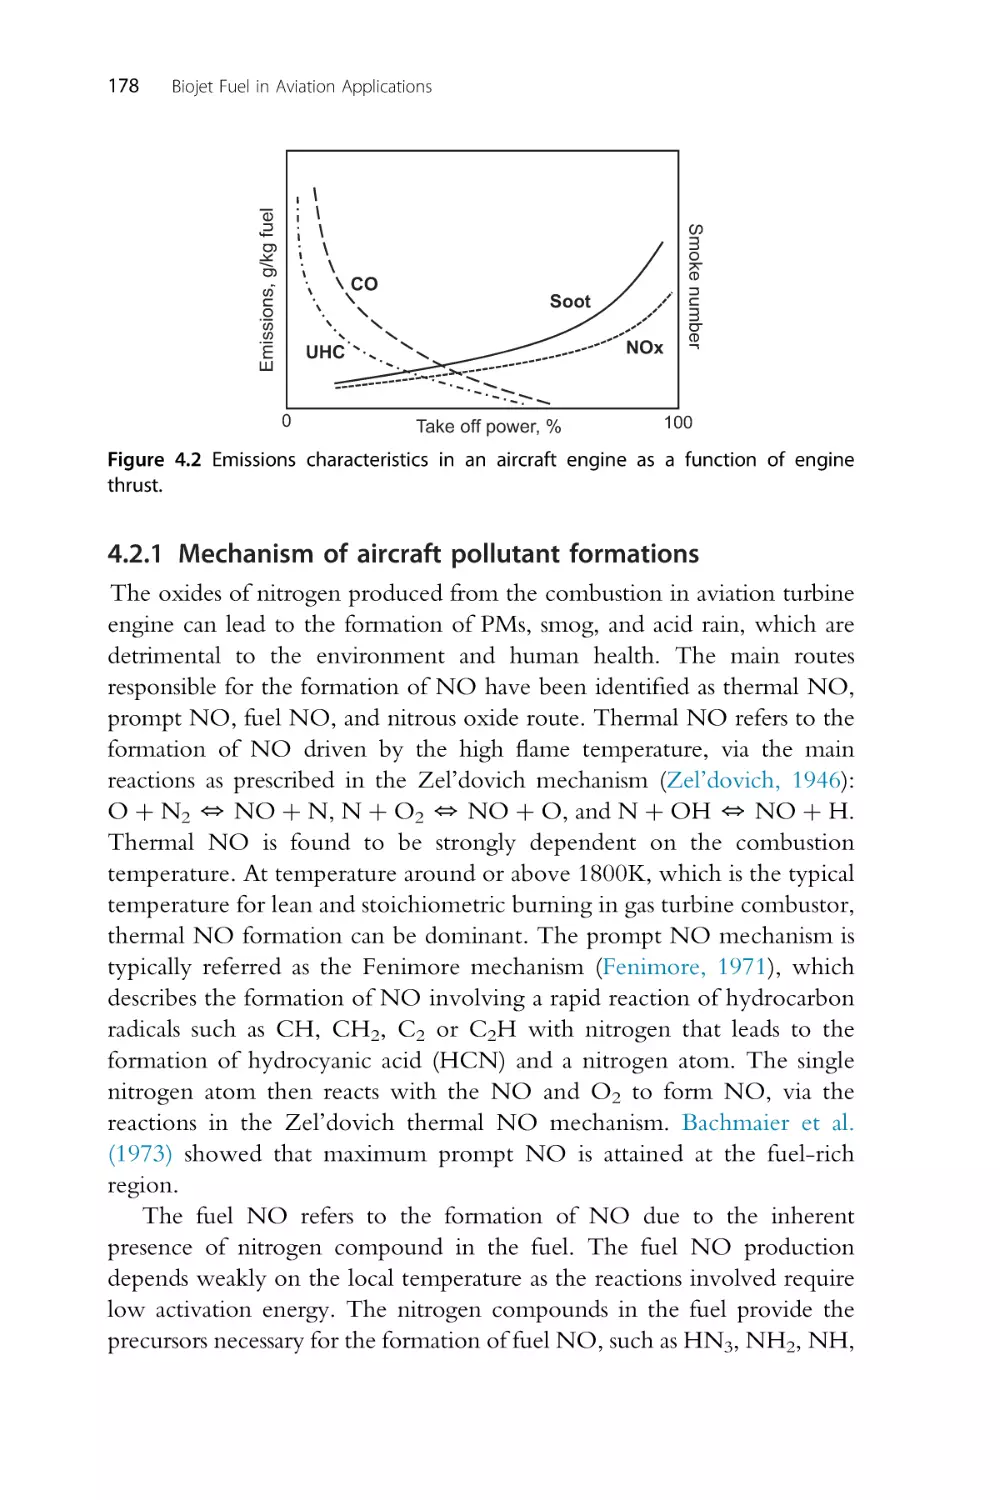 4.2.1 Mechanism of aircraft pollutant formations